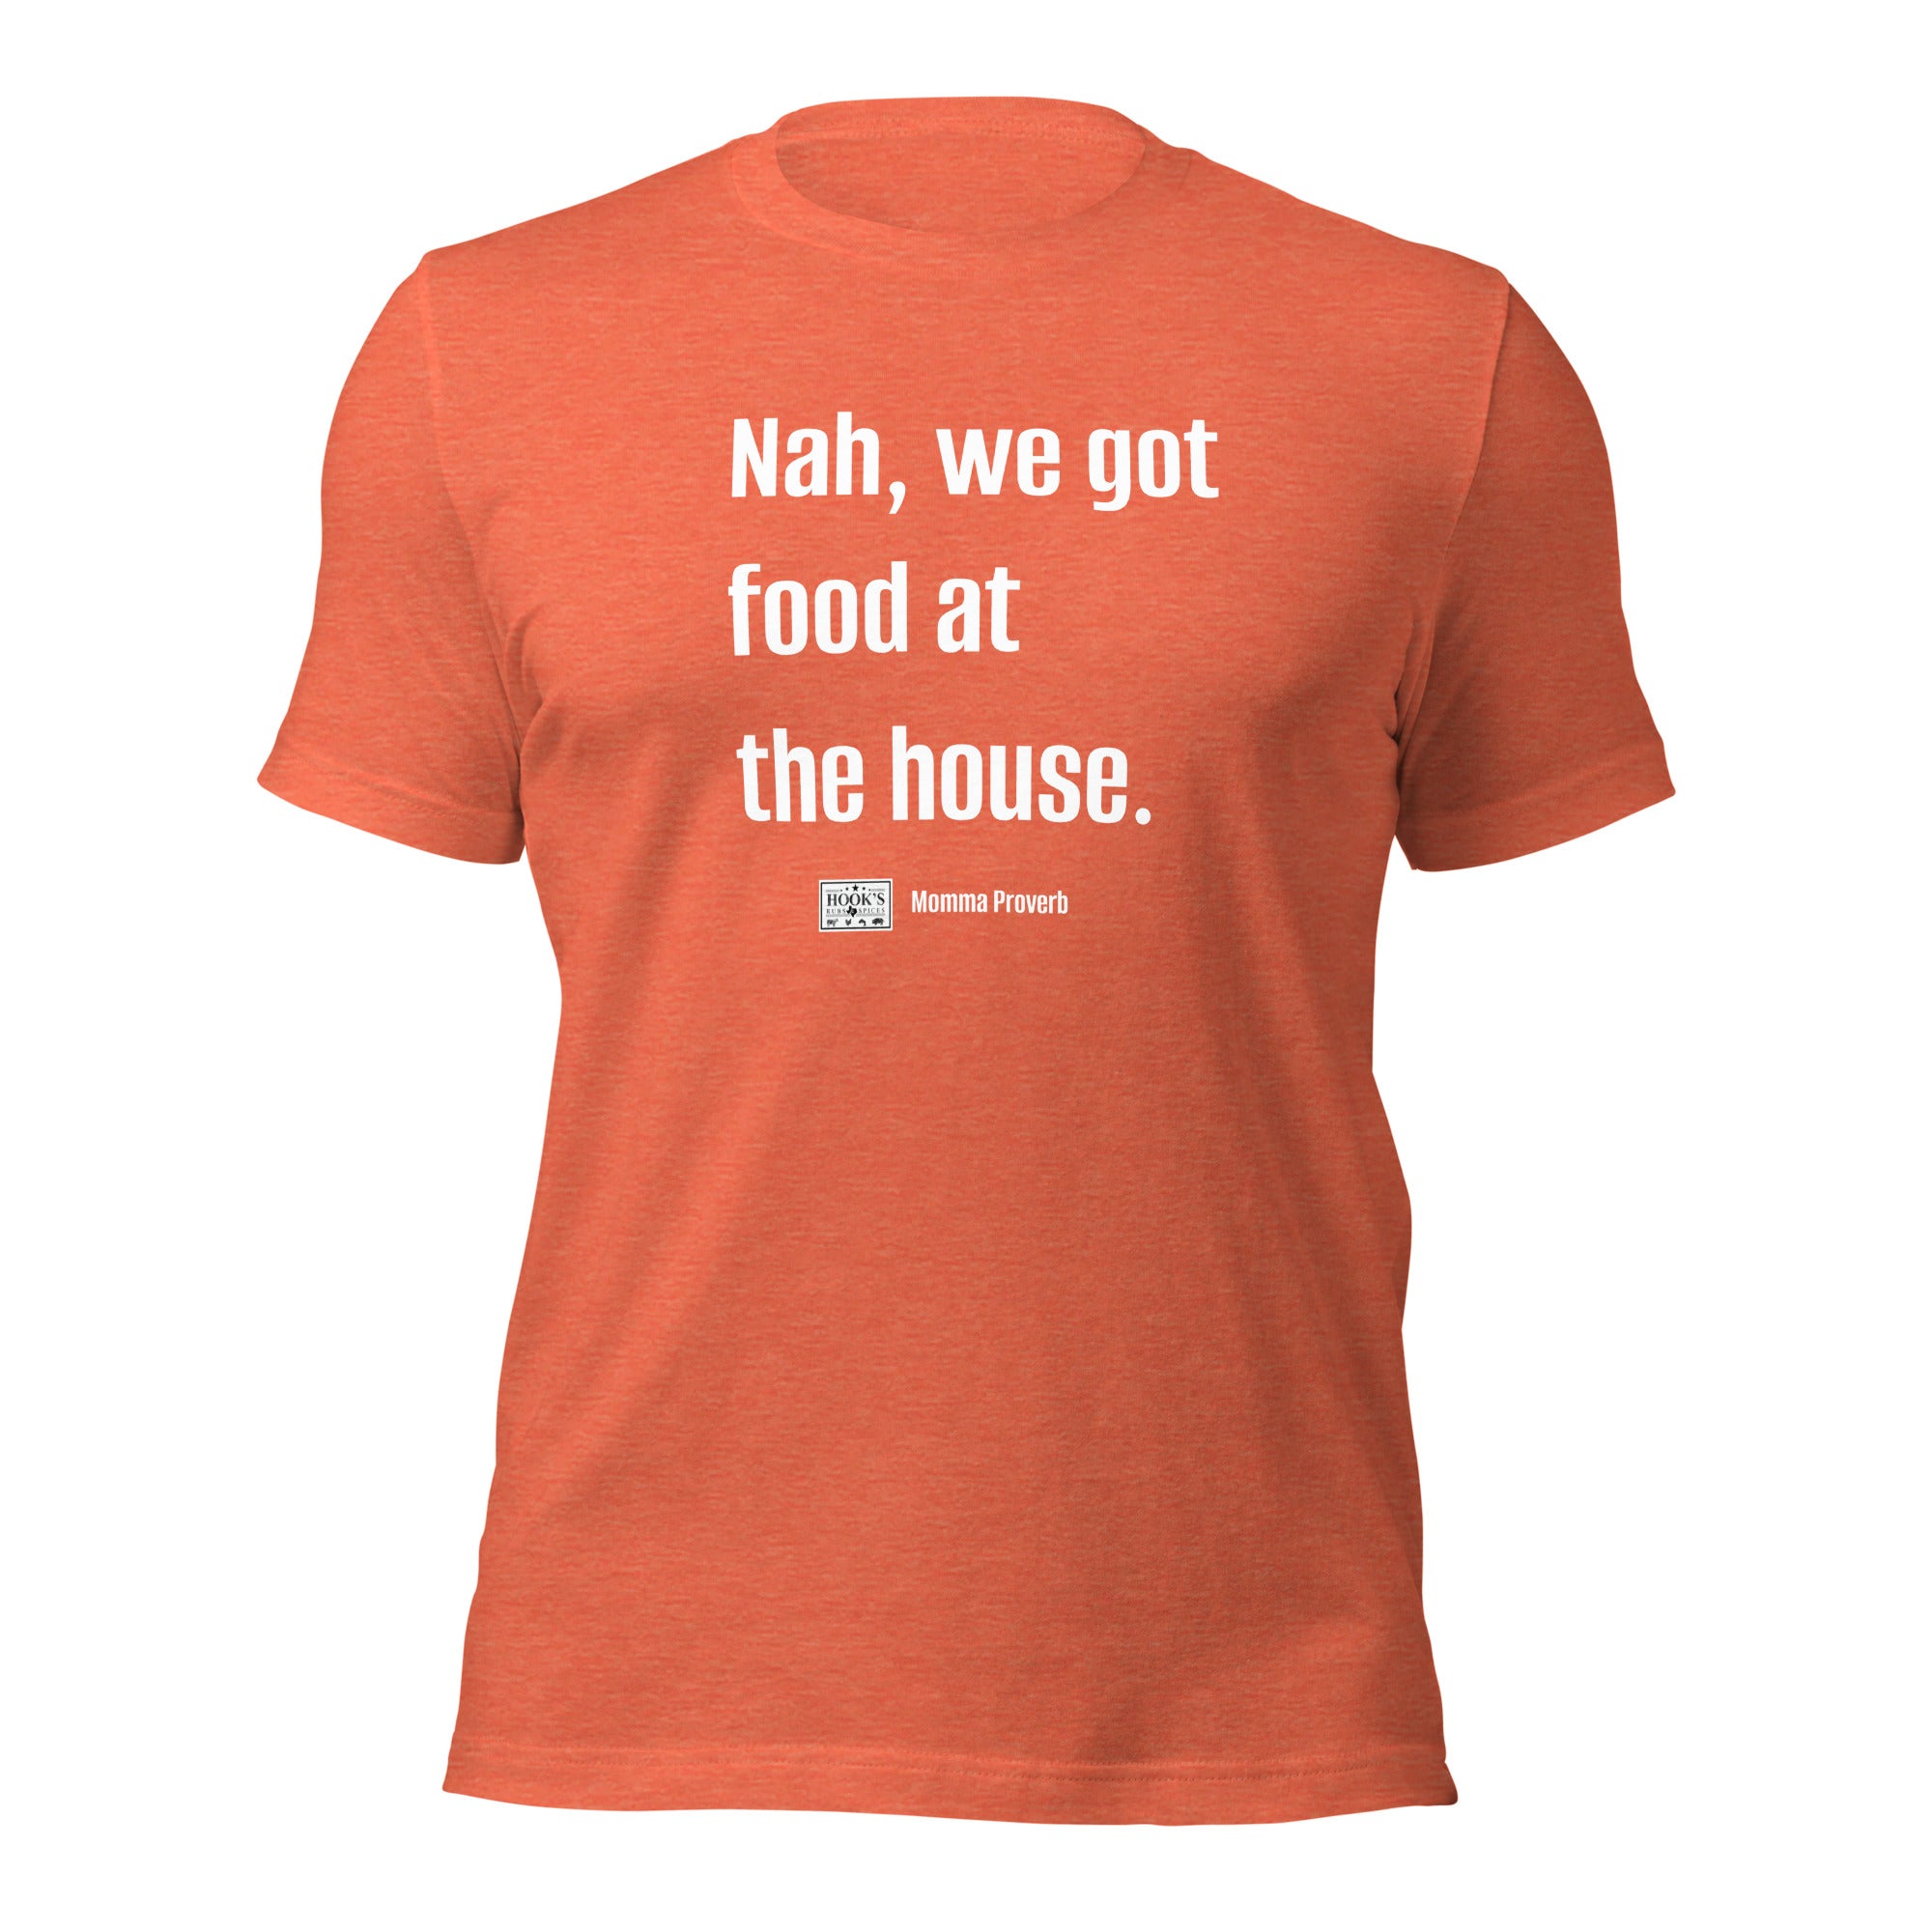 We Got Food at the House Momma Proverb T-Shirt